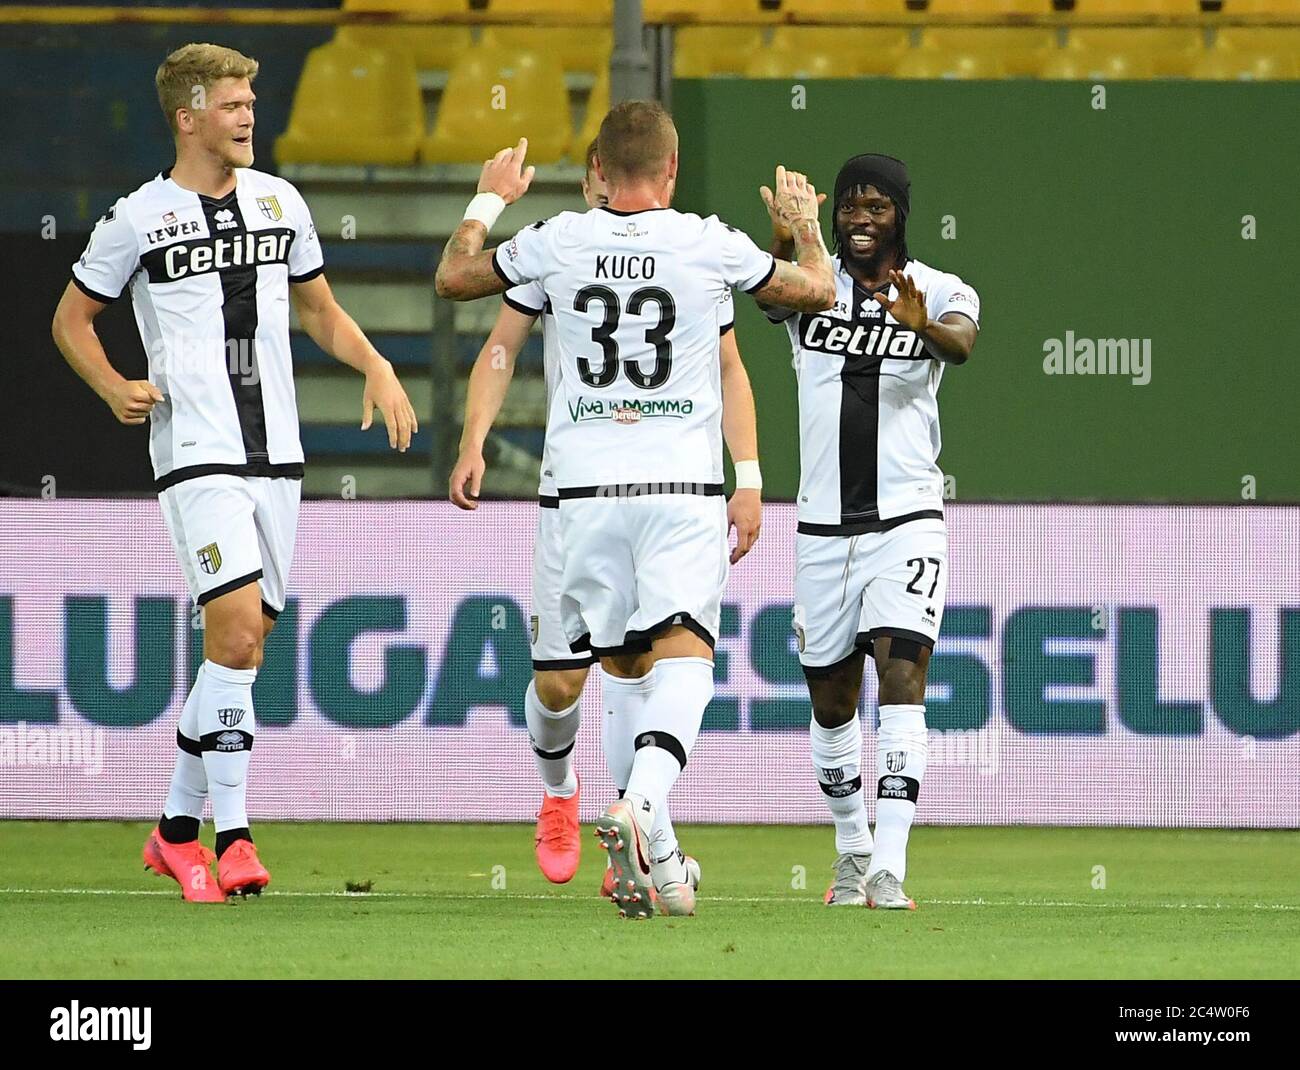 Parma, Italy. 28th June, 2020. Parma's Gervinho (R) celebrates his goal with his teammates during a Serie A match between Parma and Inter Milan in Parma, Italy, June 28, 2020. Credit: Alberto Lingria/Xinhua/Alamy Live News Stock Photo